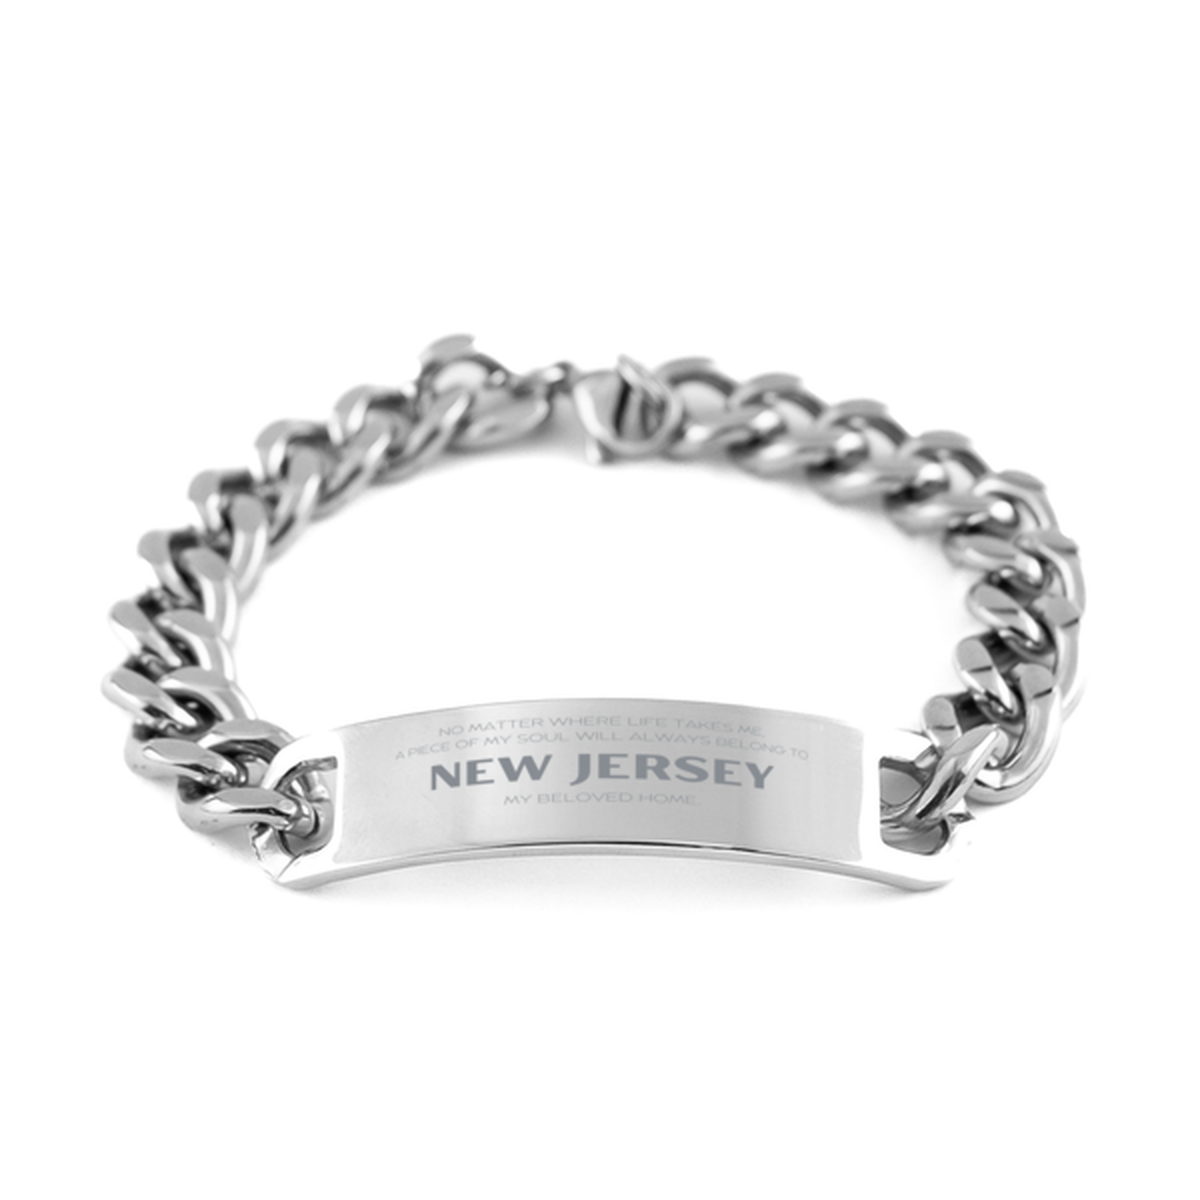 Love New Jersey State Gifts, My soul will always belong to New Jersey, Proud Cuban Chain Stainless Steel Bracelet, Birthday Unique Gifts For New Jersey Men, Women, Friends